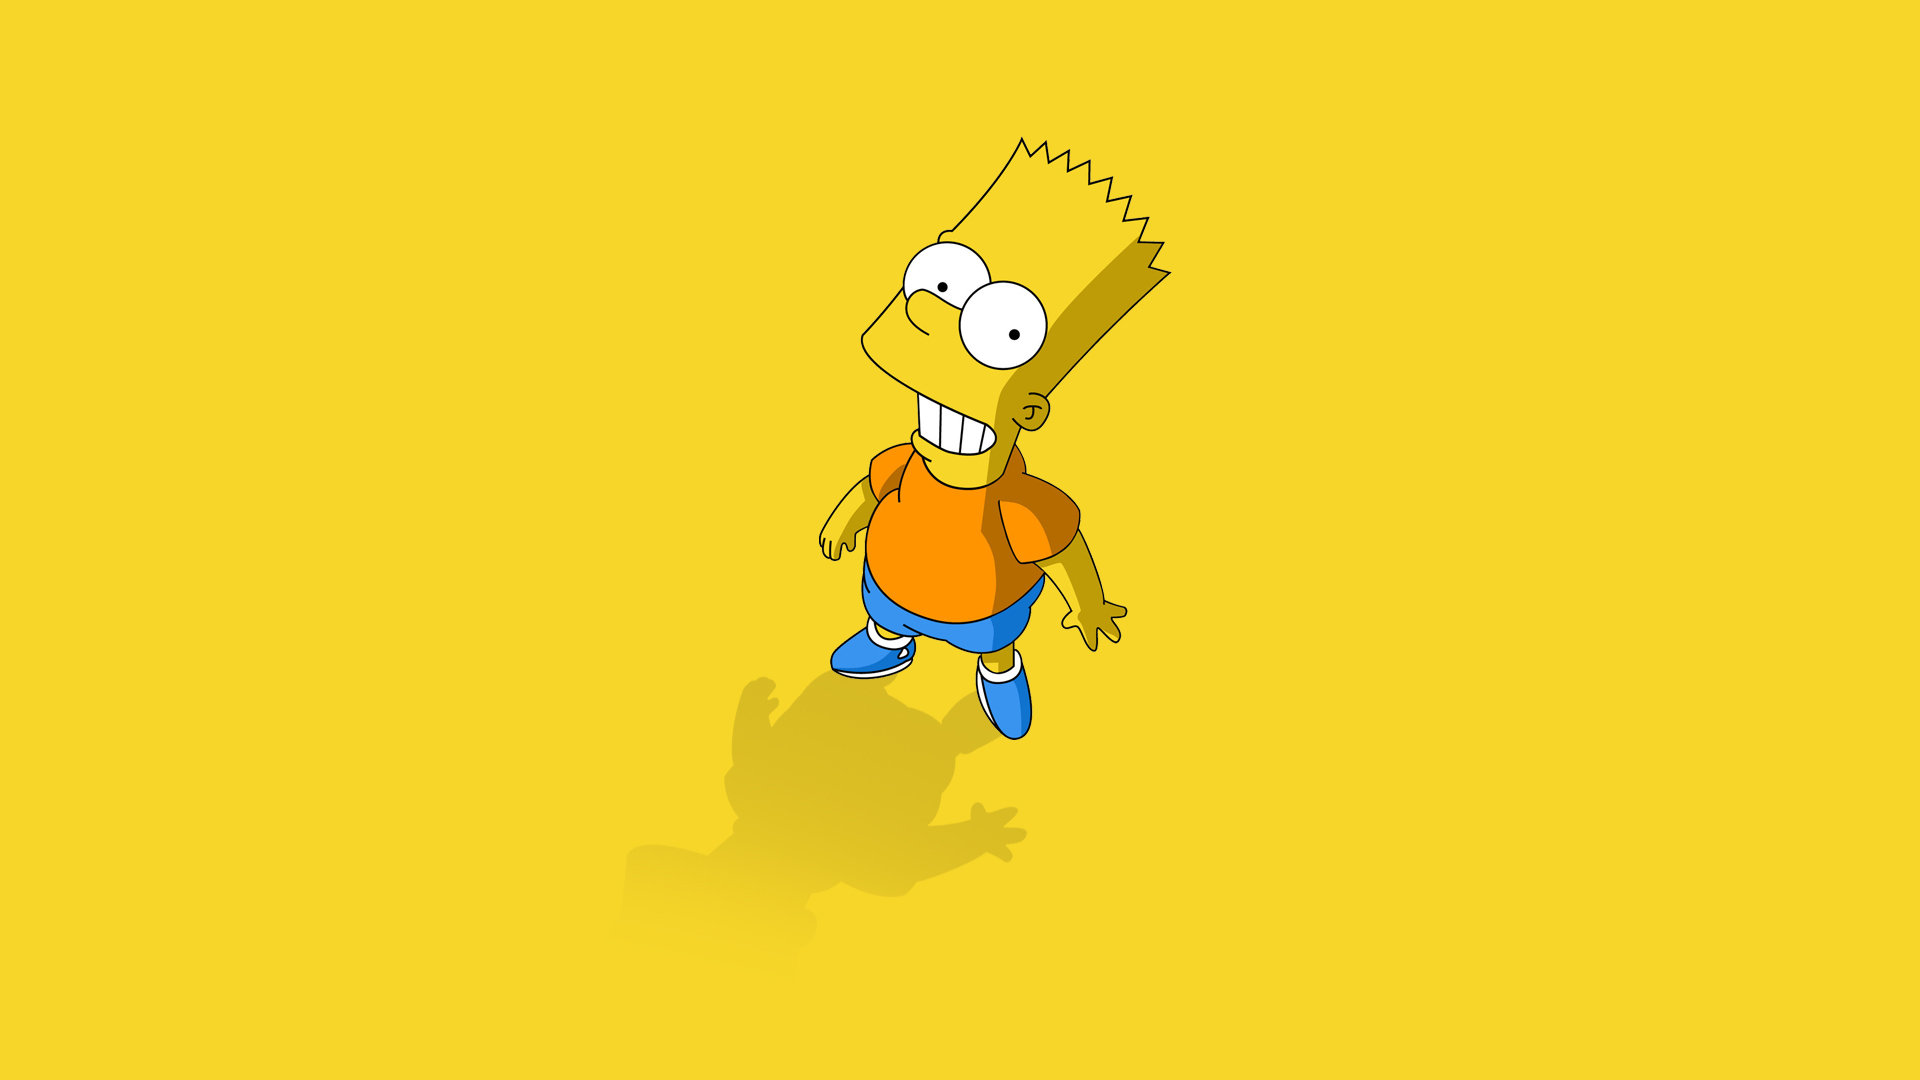 Download full hd 1920x1080 Bart Simpson PC background ID:351659 for free